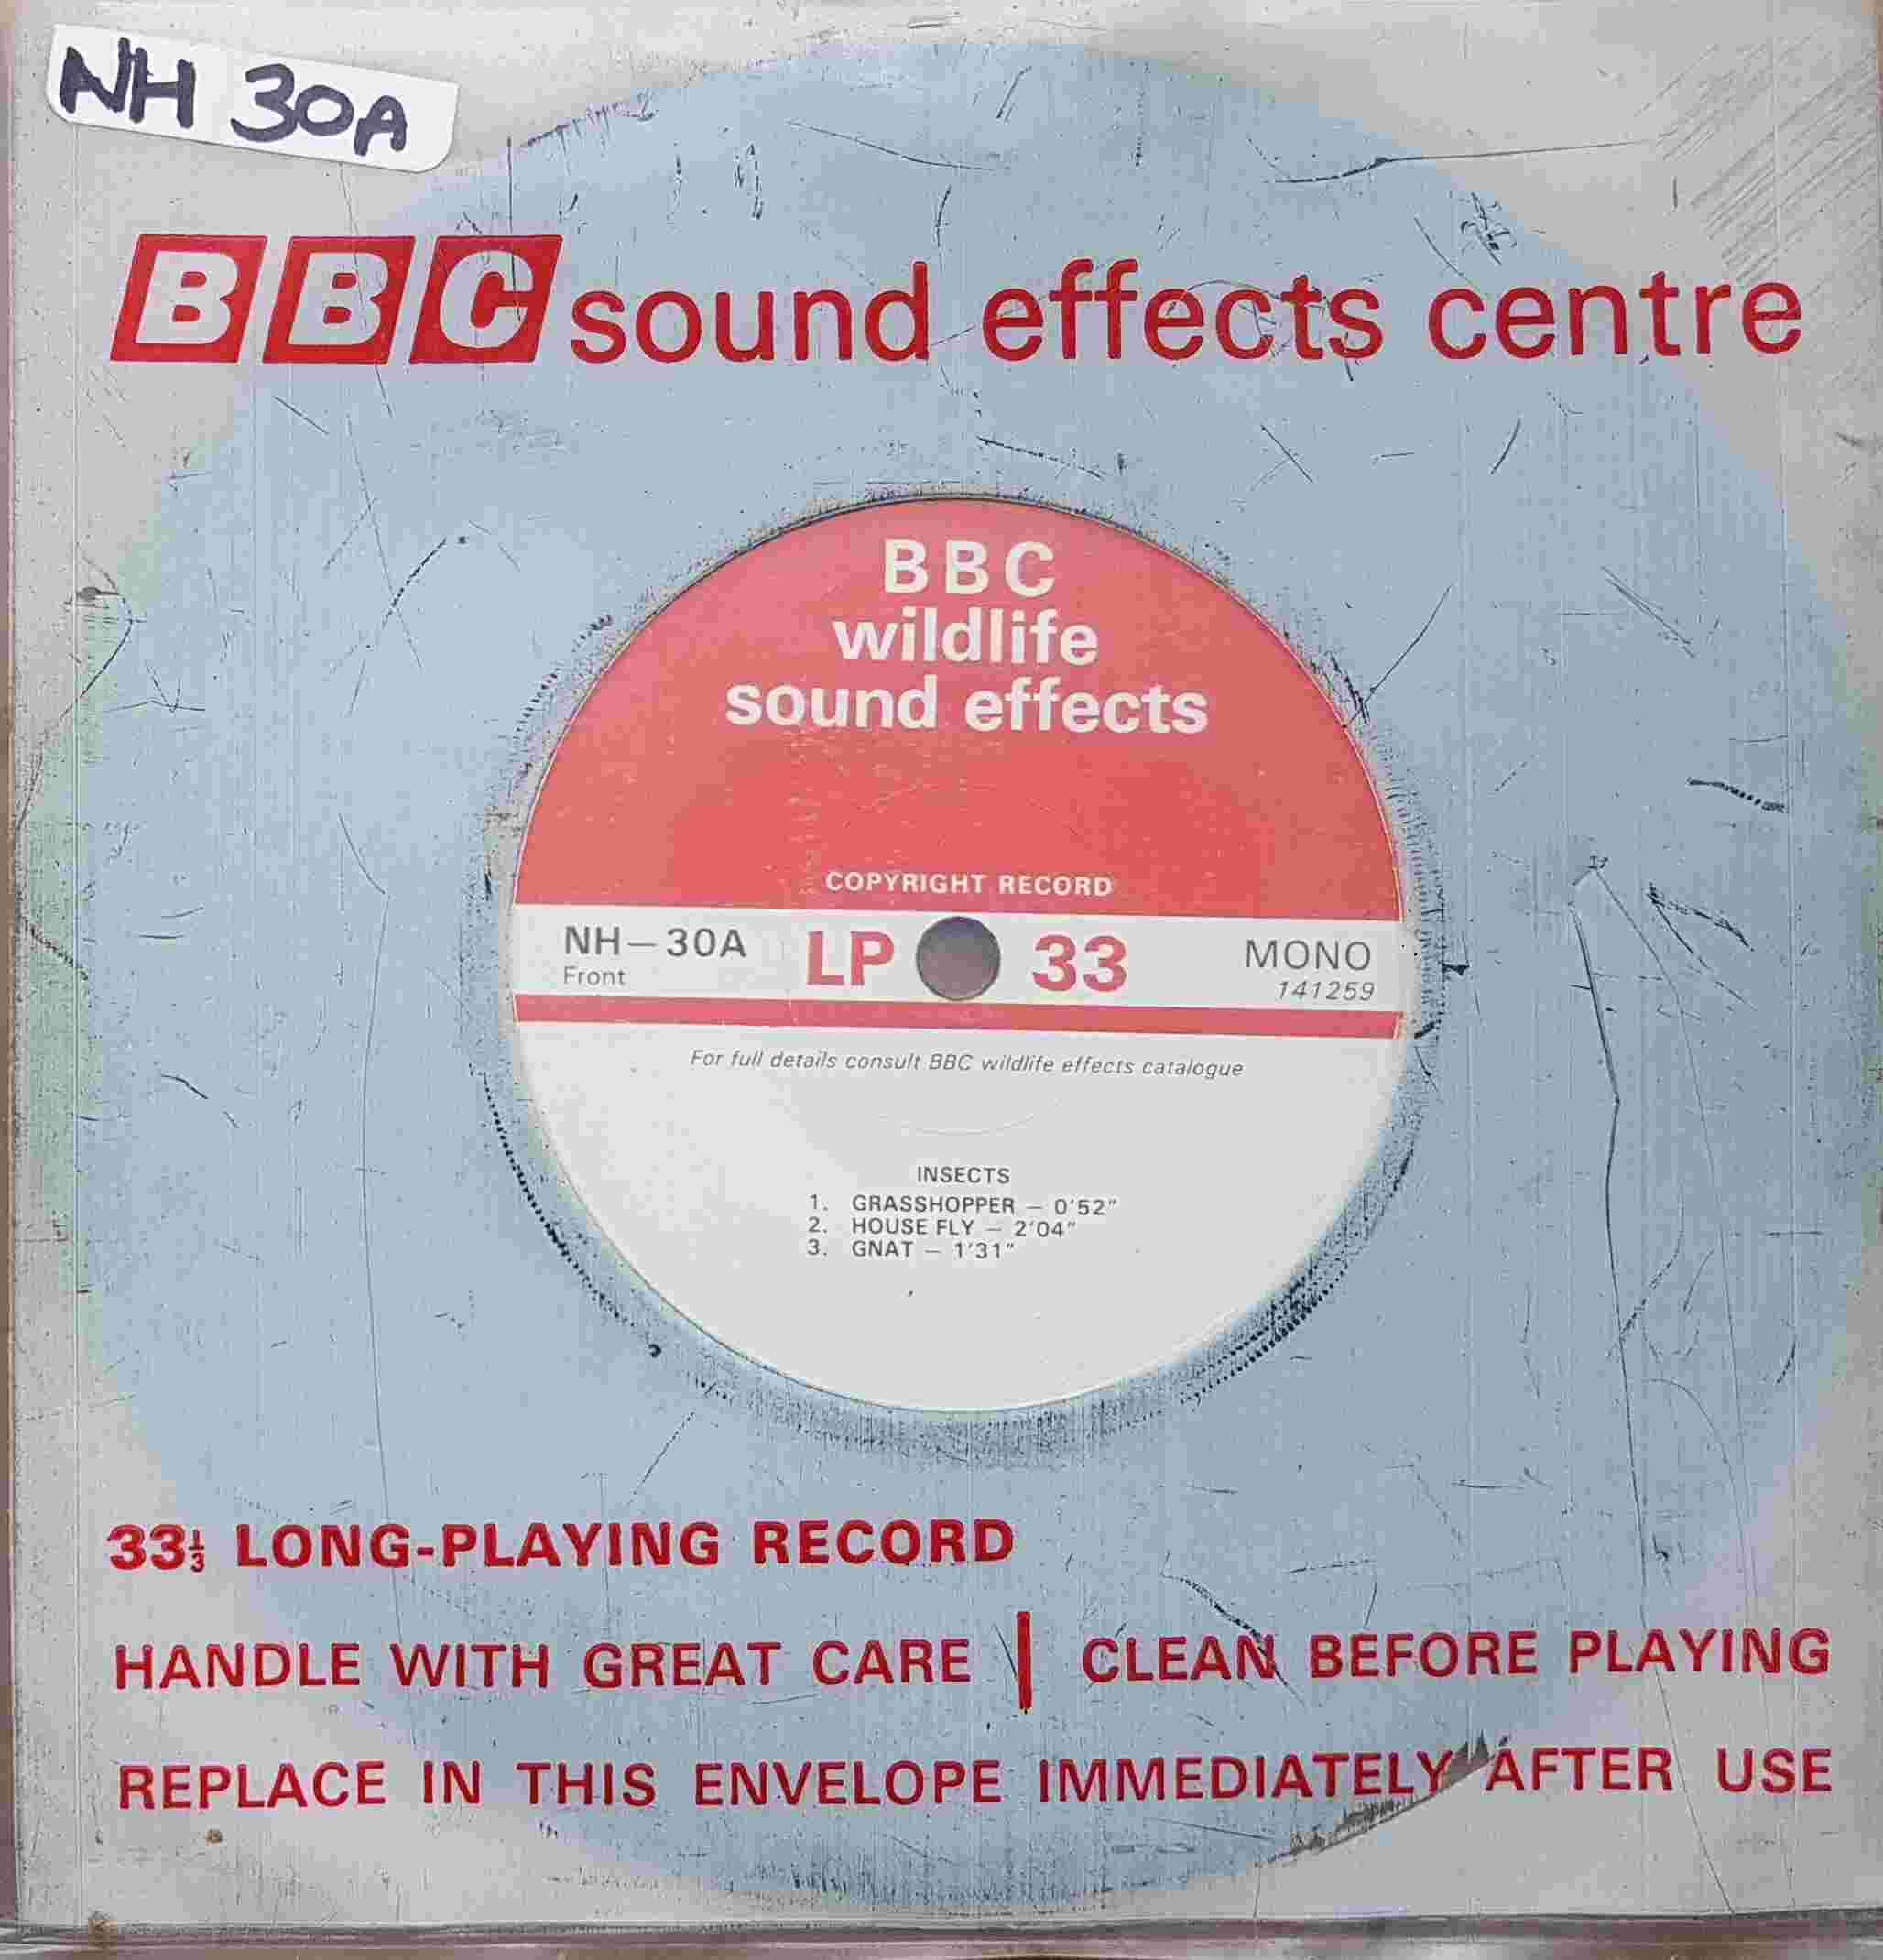 Picture of NH 30A Insects by artist Not registered from the BBC singles - Records and Tapes library